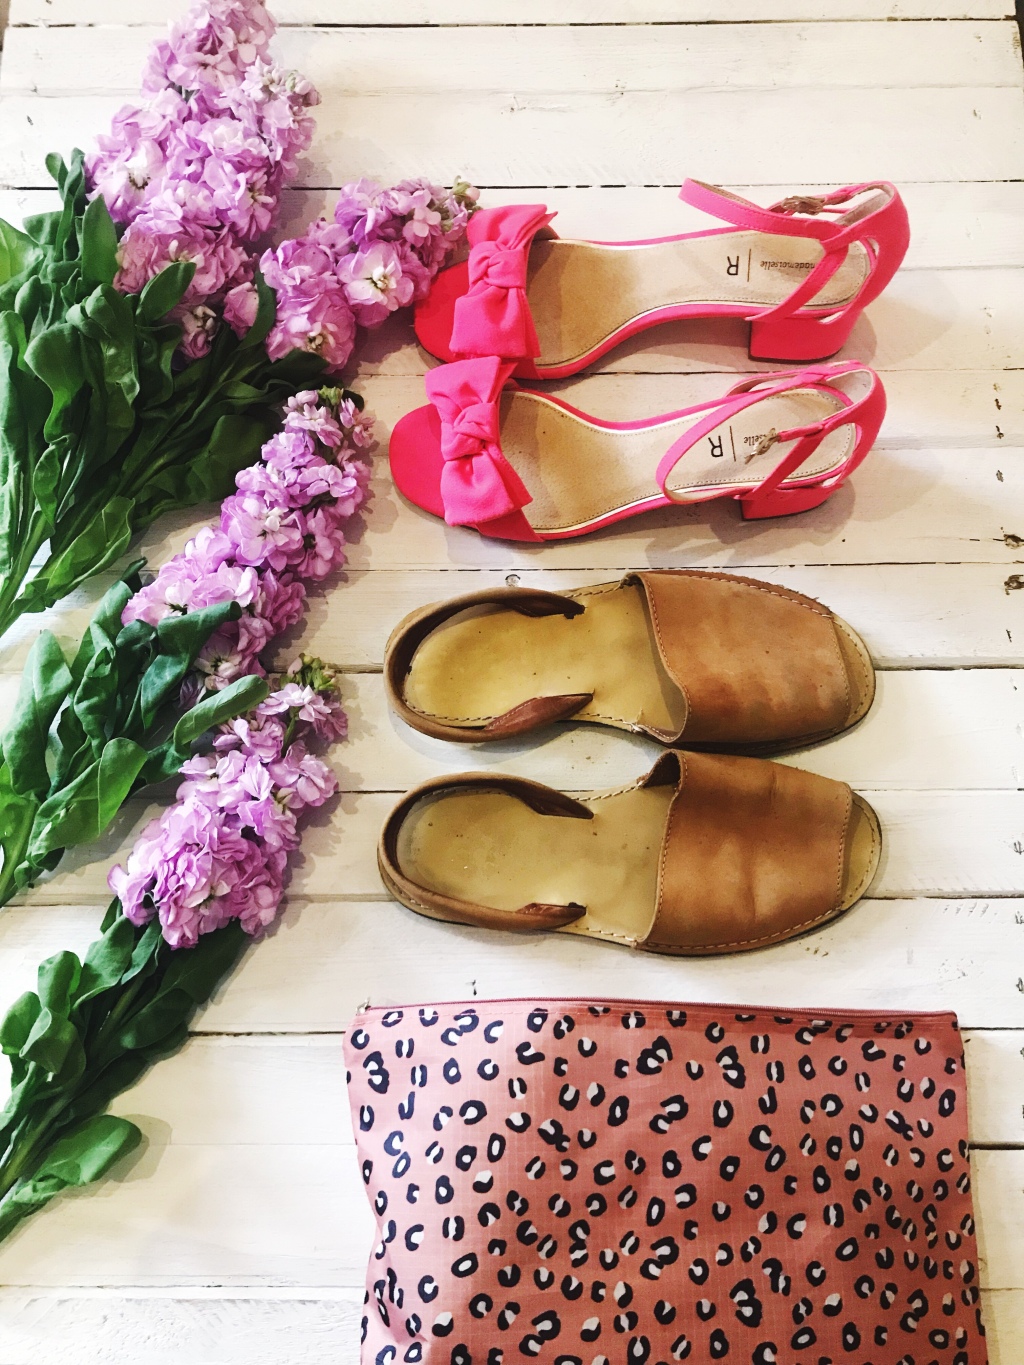 Hen do packing, what to take on a mini break